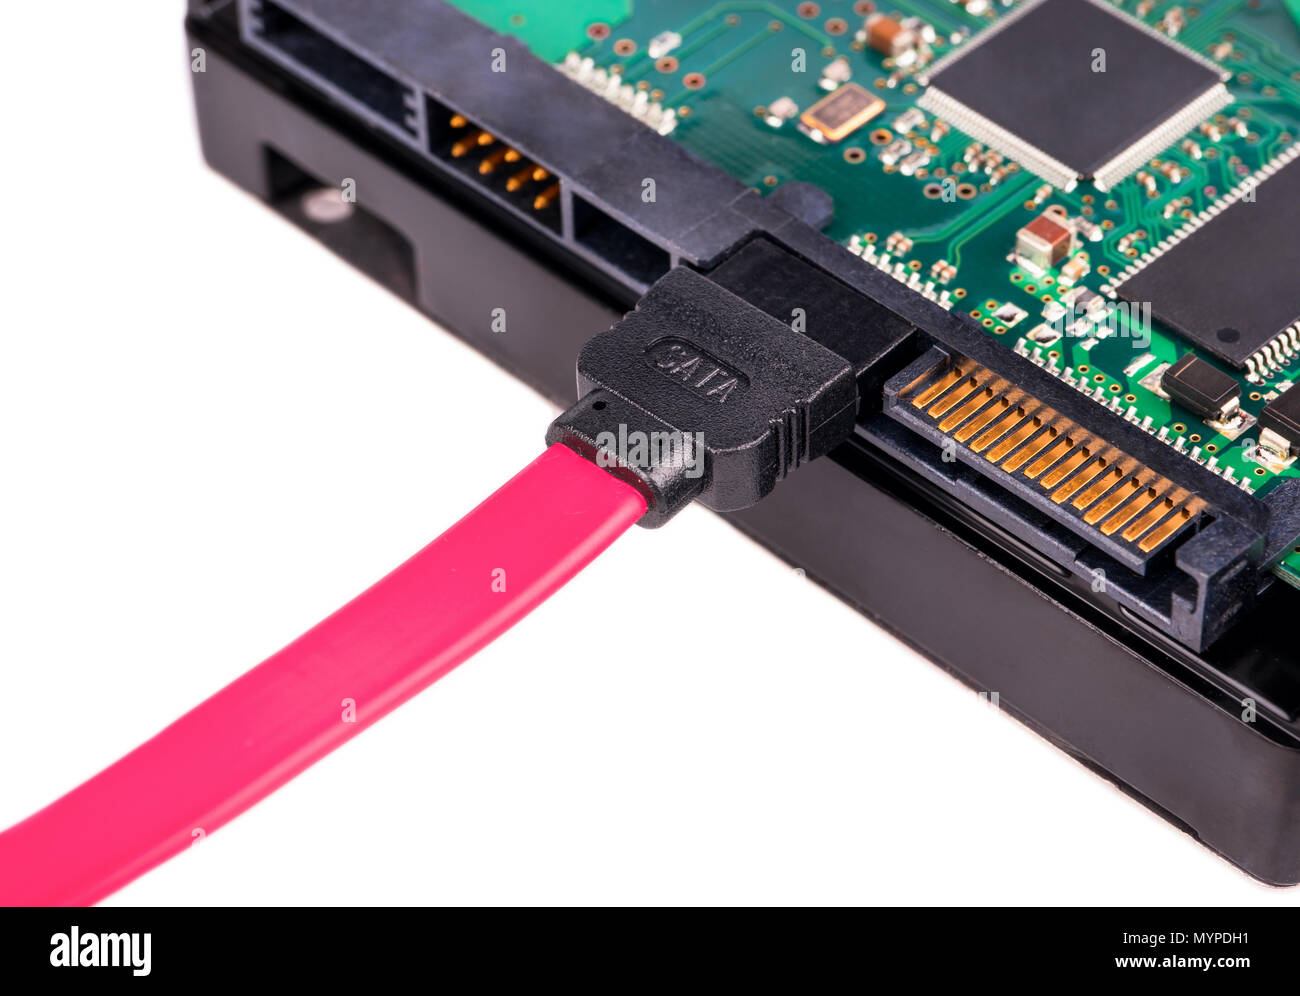 Hard disk drive (HDD) connected to the sata cable close-up Stock Photo -  Alamy